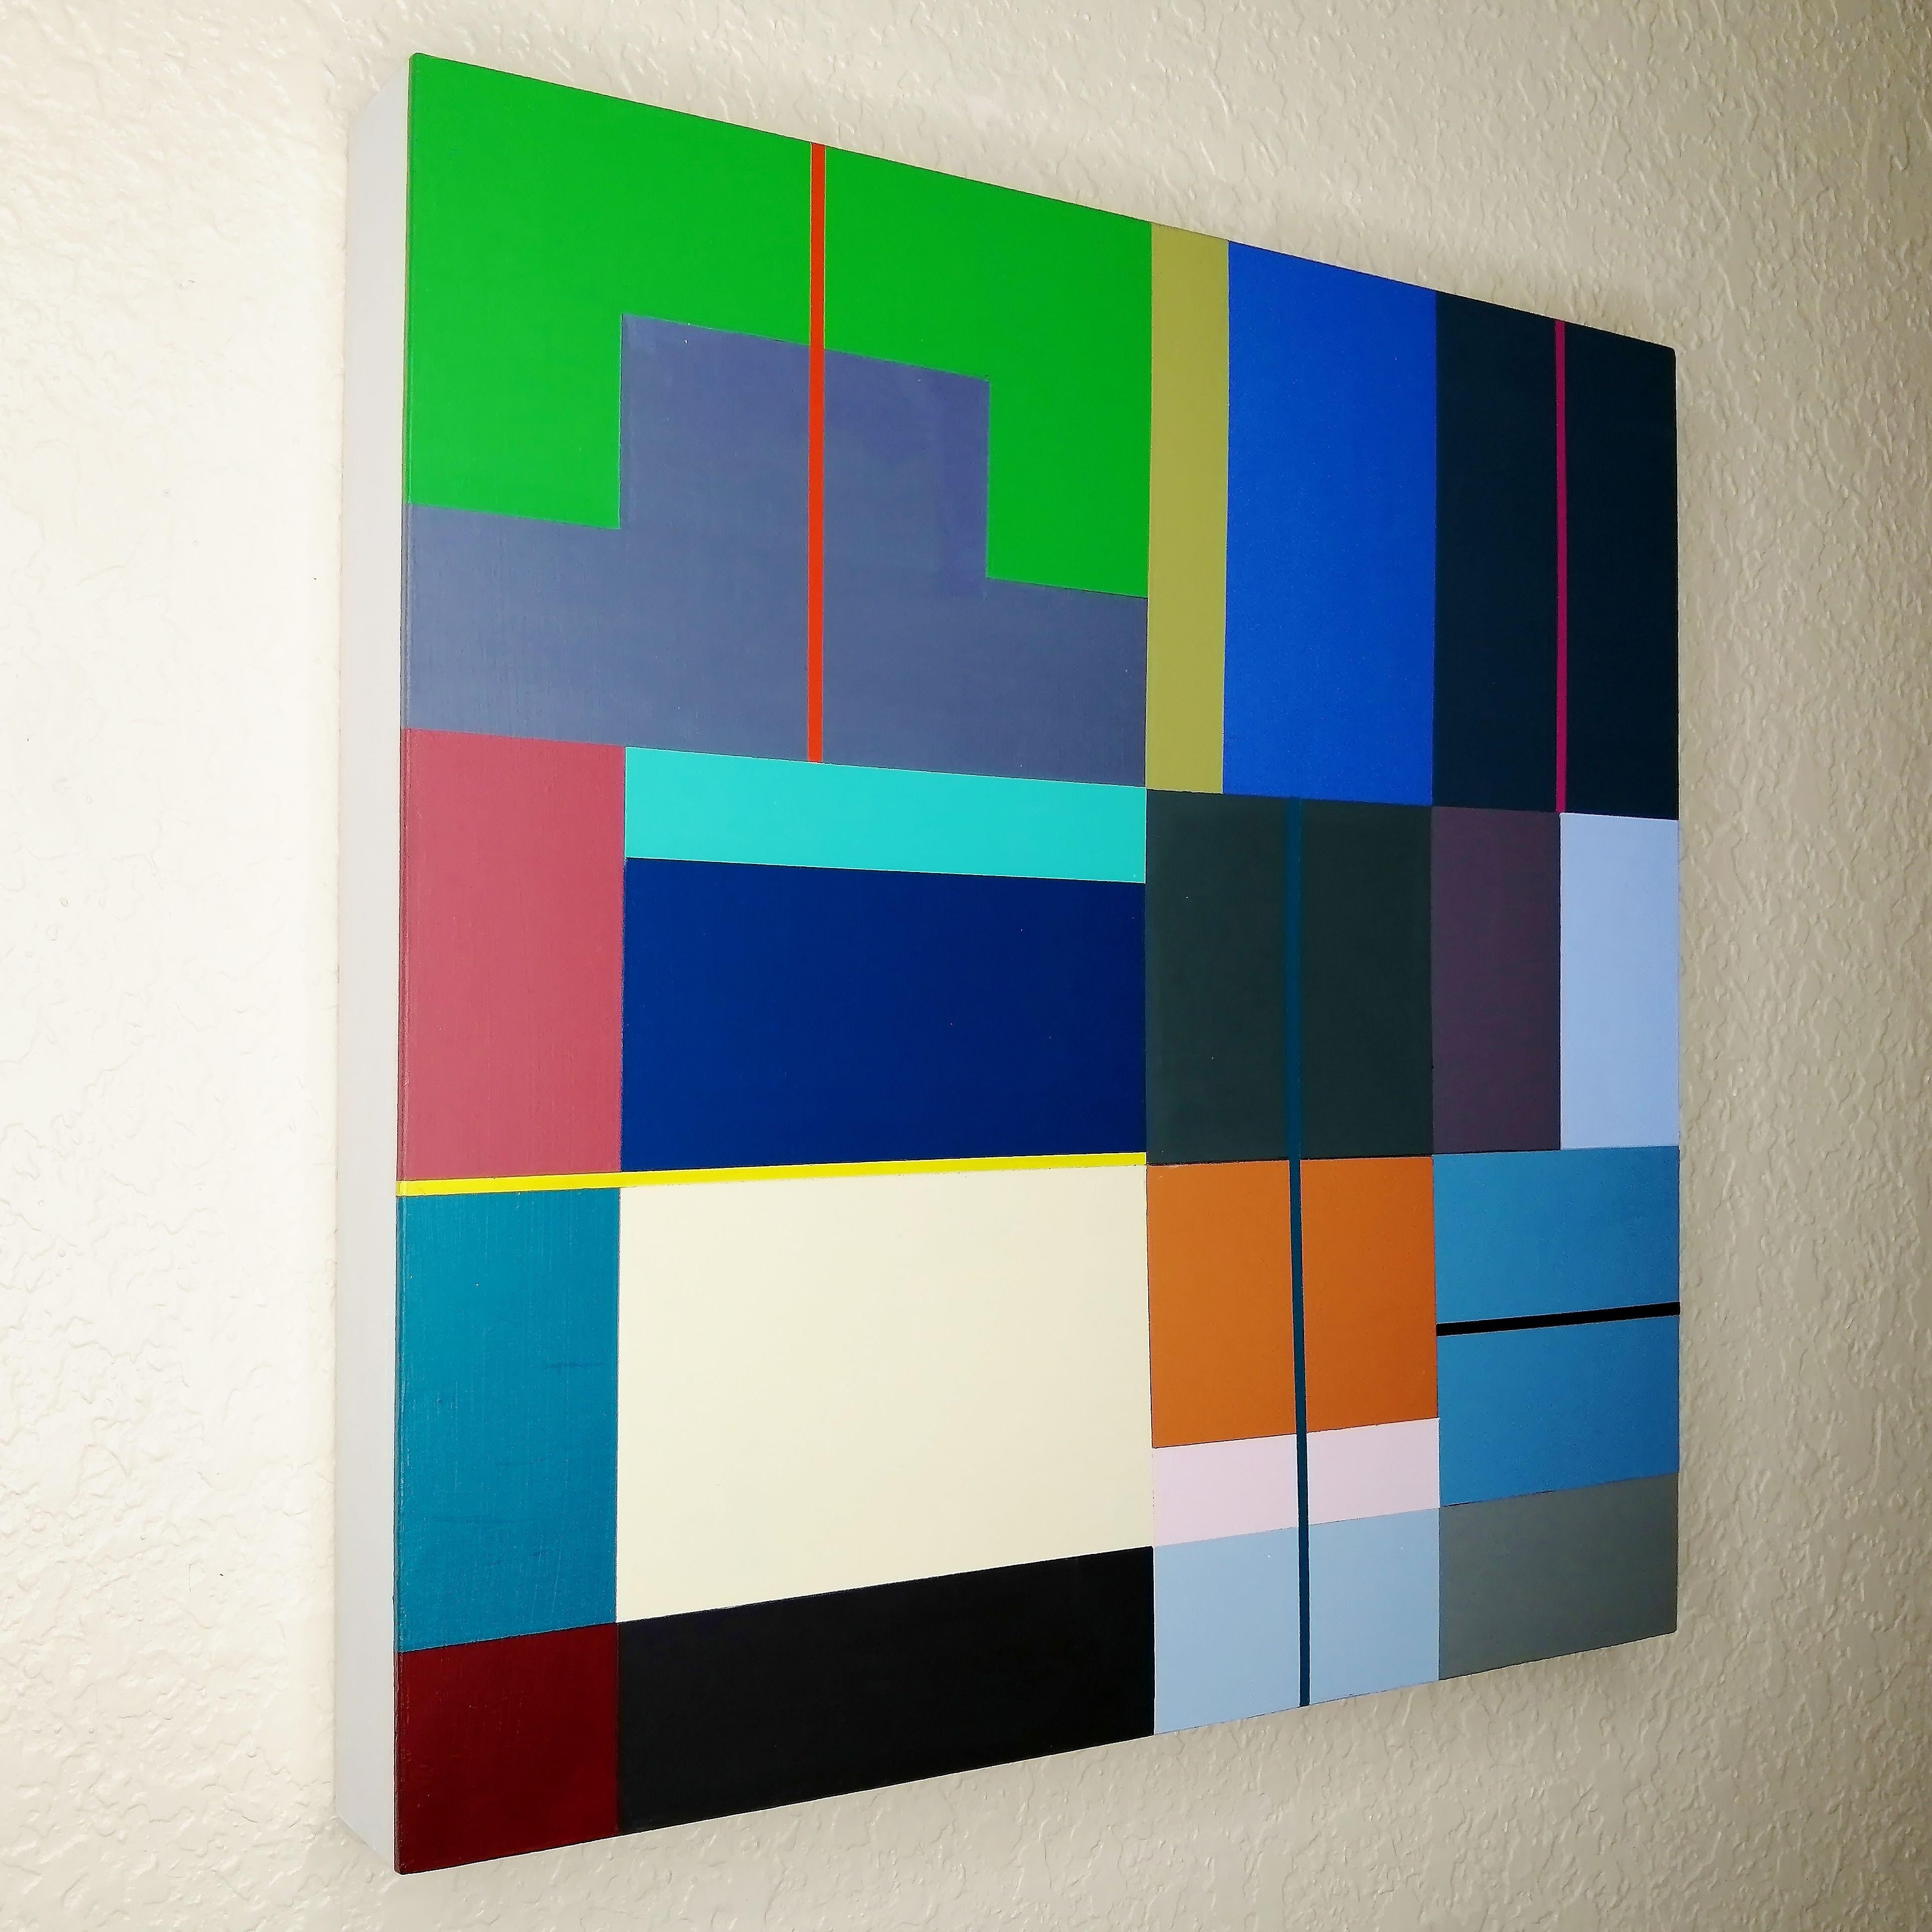 This is another painting in my Concrete Composition series and continues my work in Contemporary Geometric Hard Edge Minimalism. Consisting of color blocks of blues, bright green, mauve, champagne, grays, reds, punctuated with thin lines of